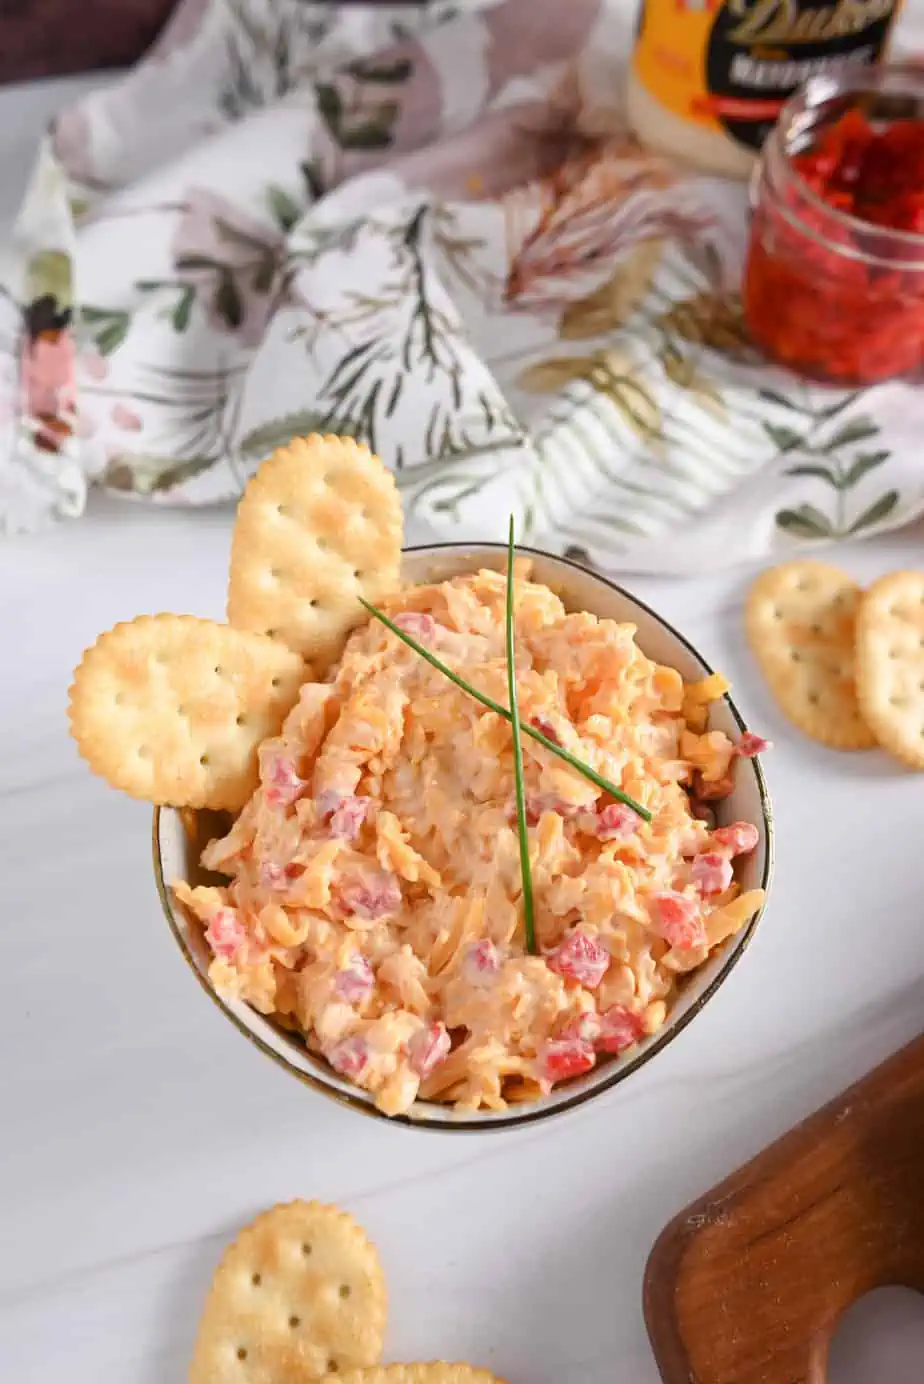 Overhead view of a white bowl filled with pimento cheese and garnished with chives and crackers.